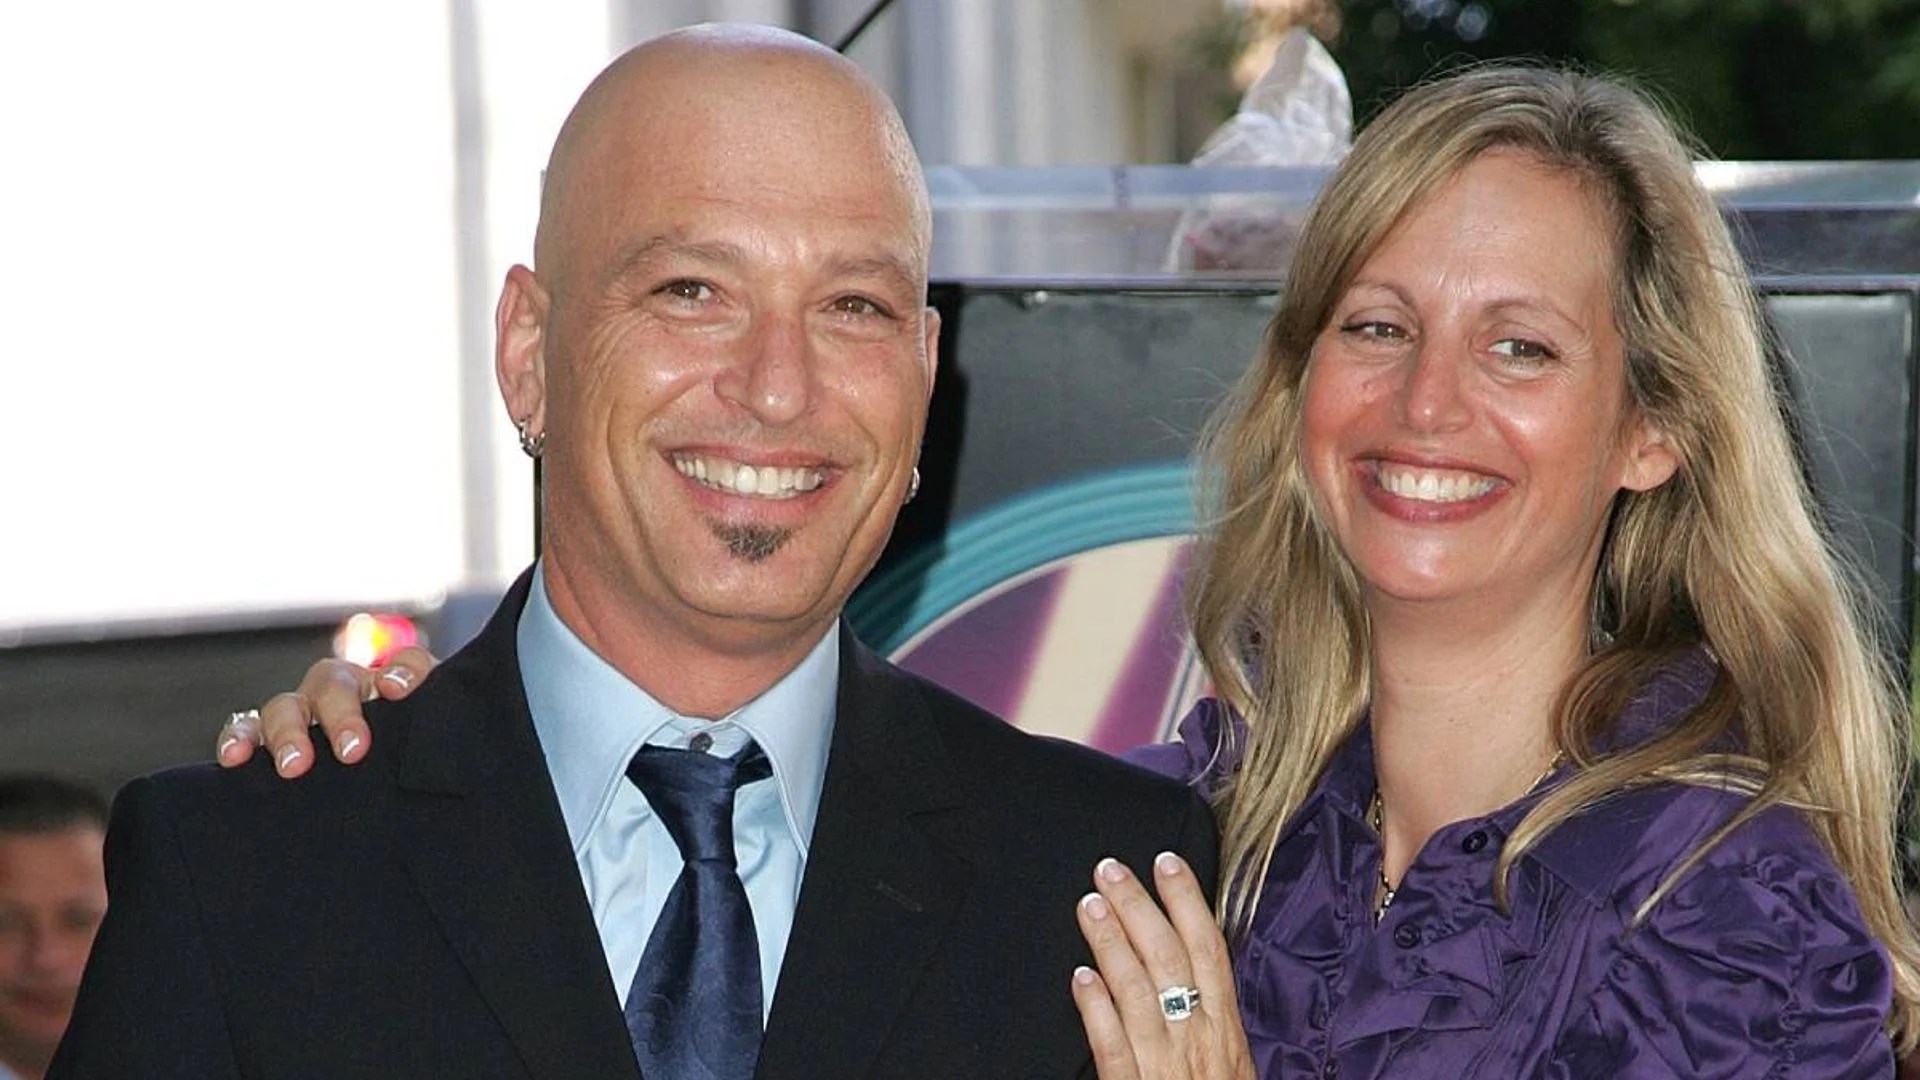 AGT's Howie Mandel shares adorable photo of rarelyseen daughter and